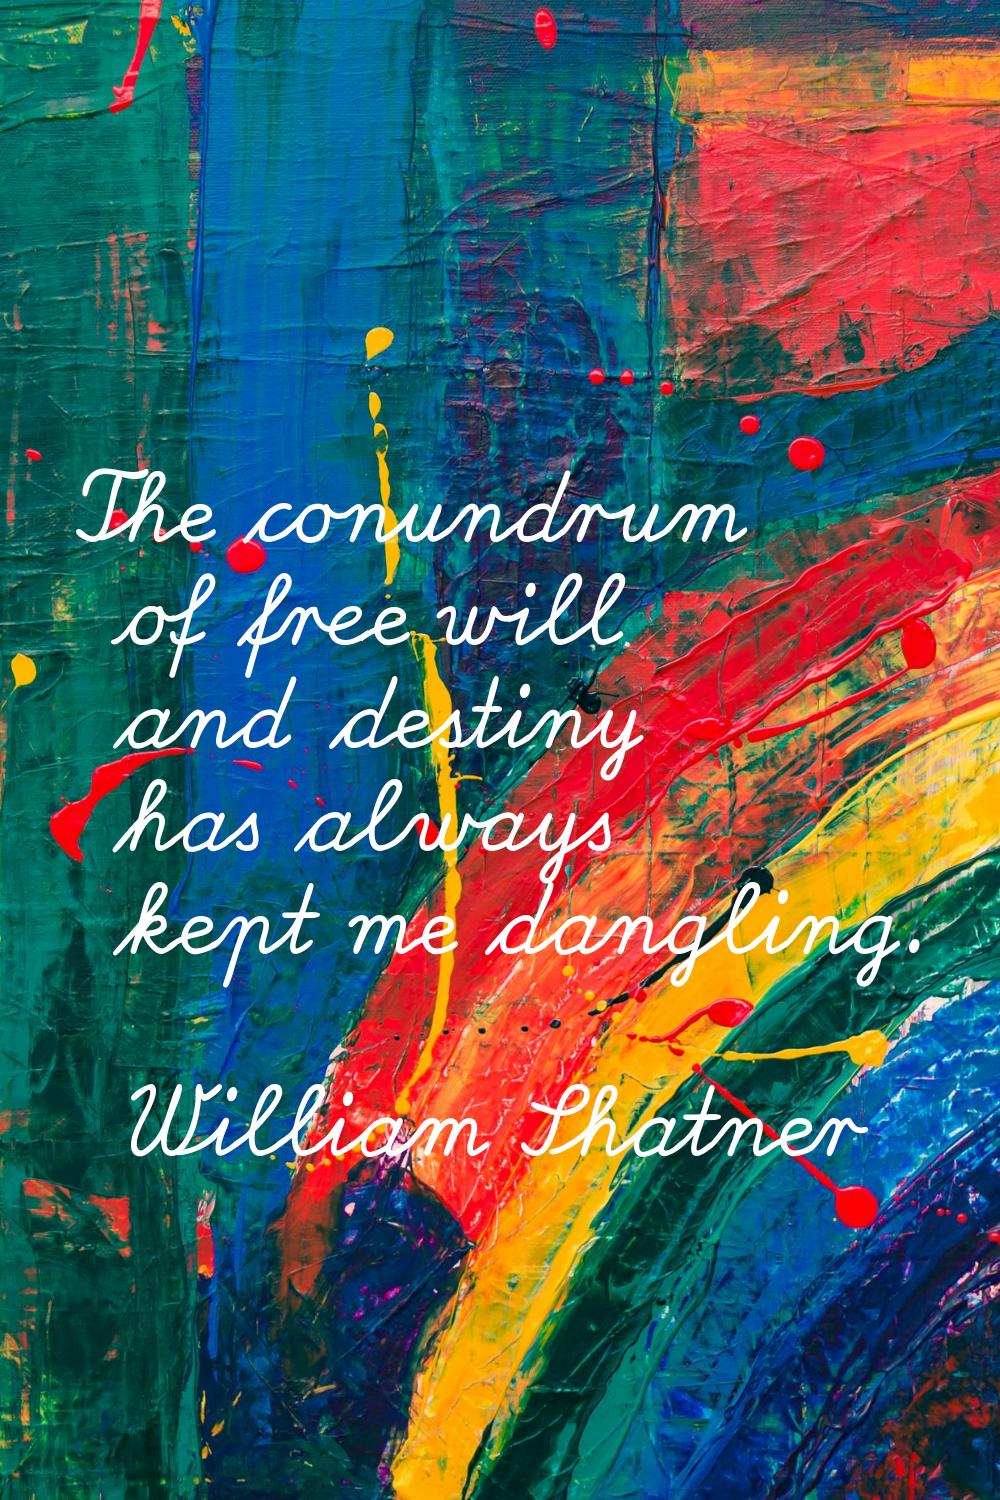 The conundrum of free will and destiny has always kept me dangling.